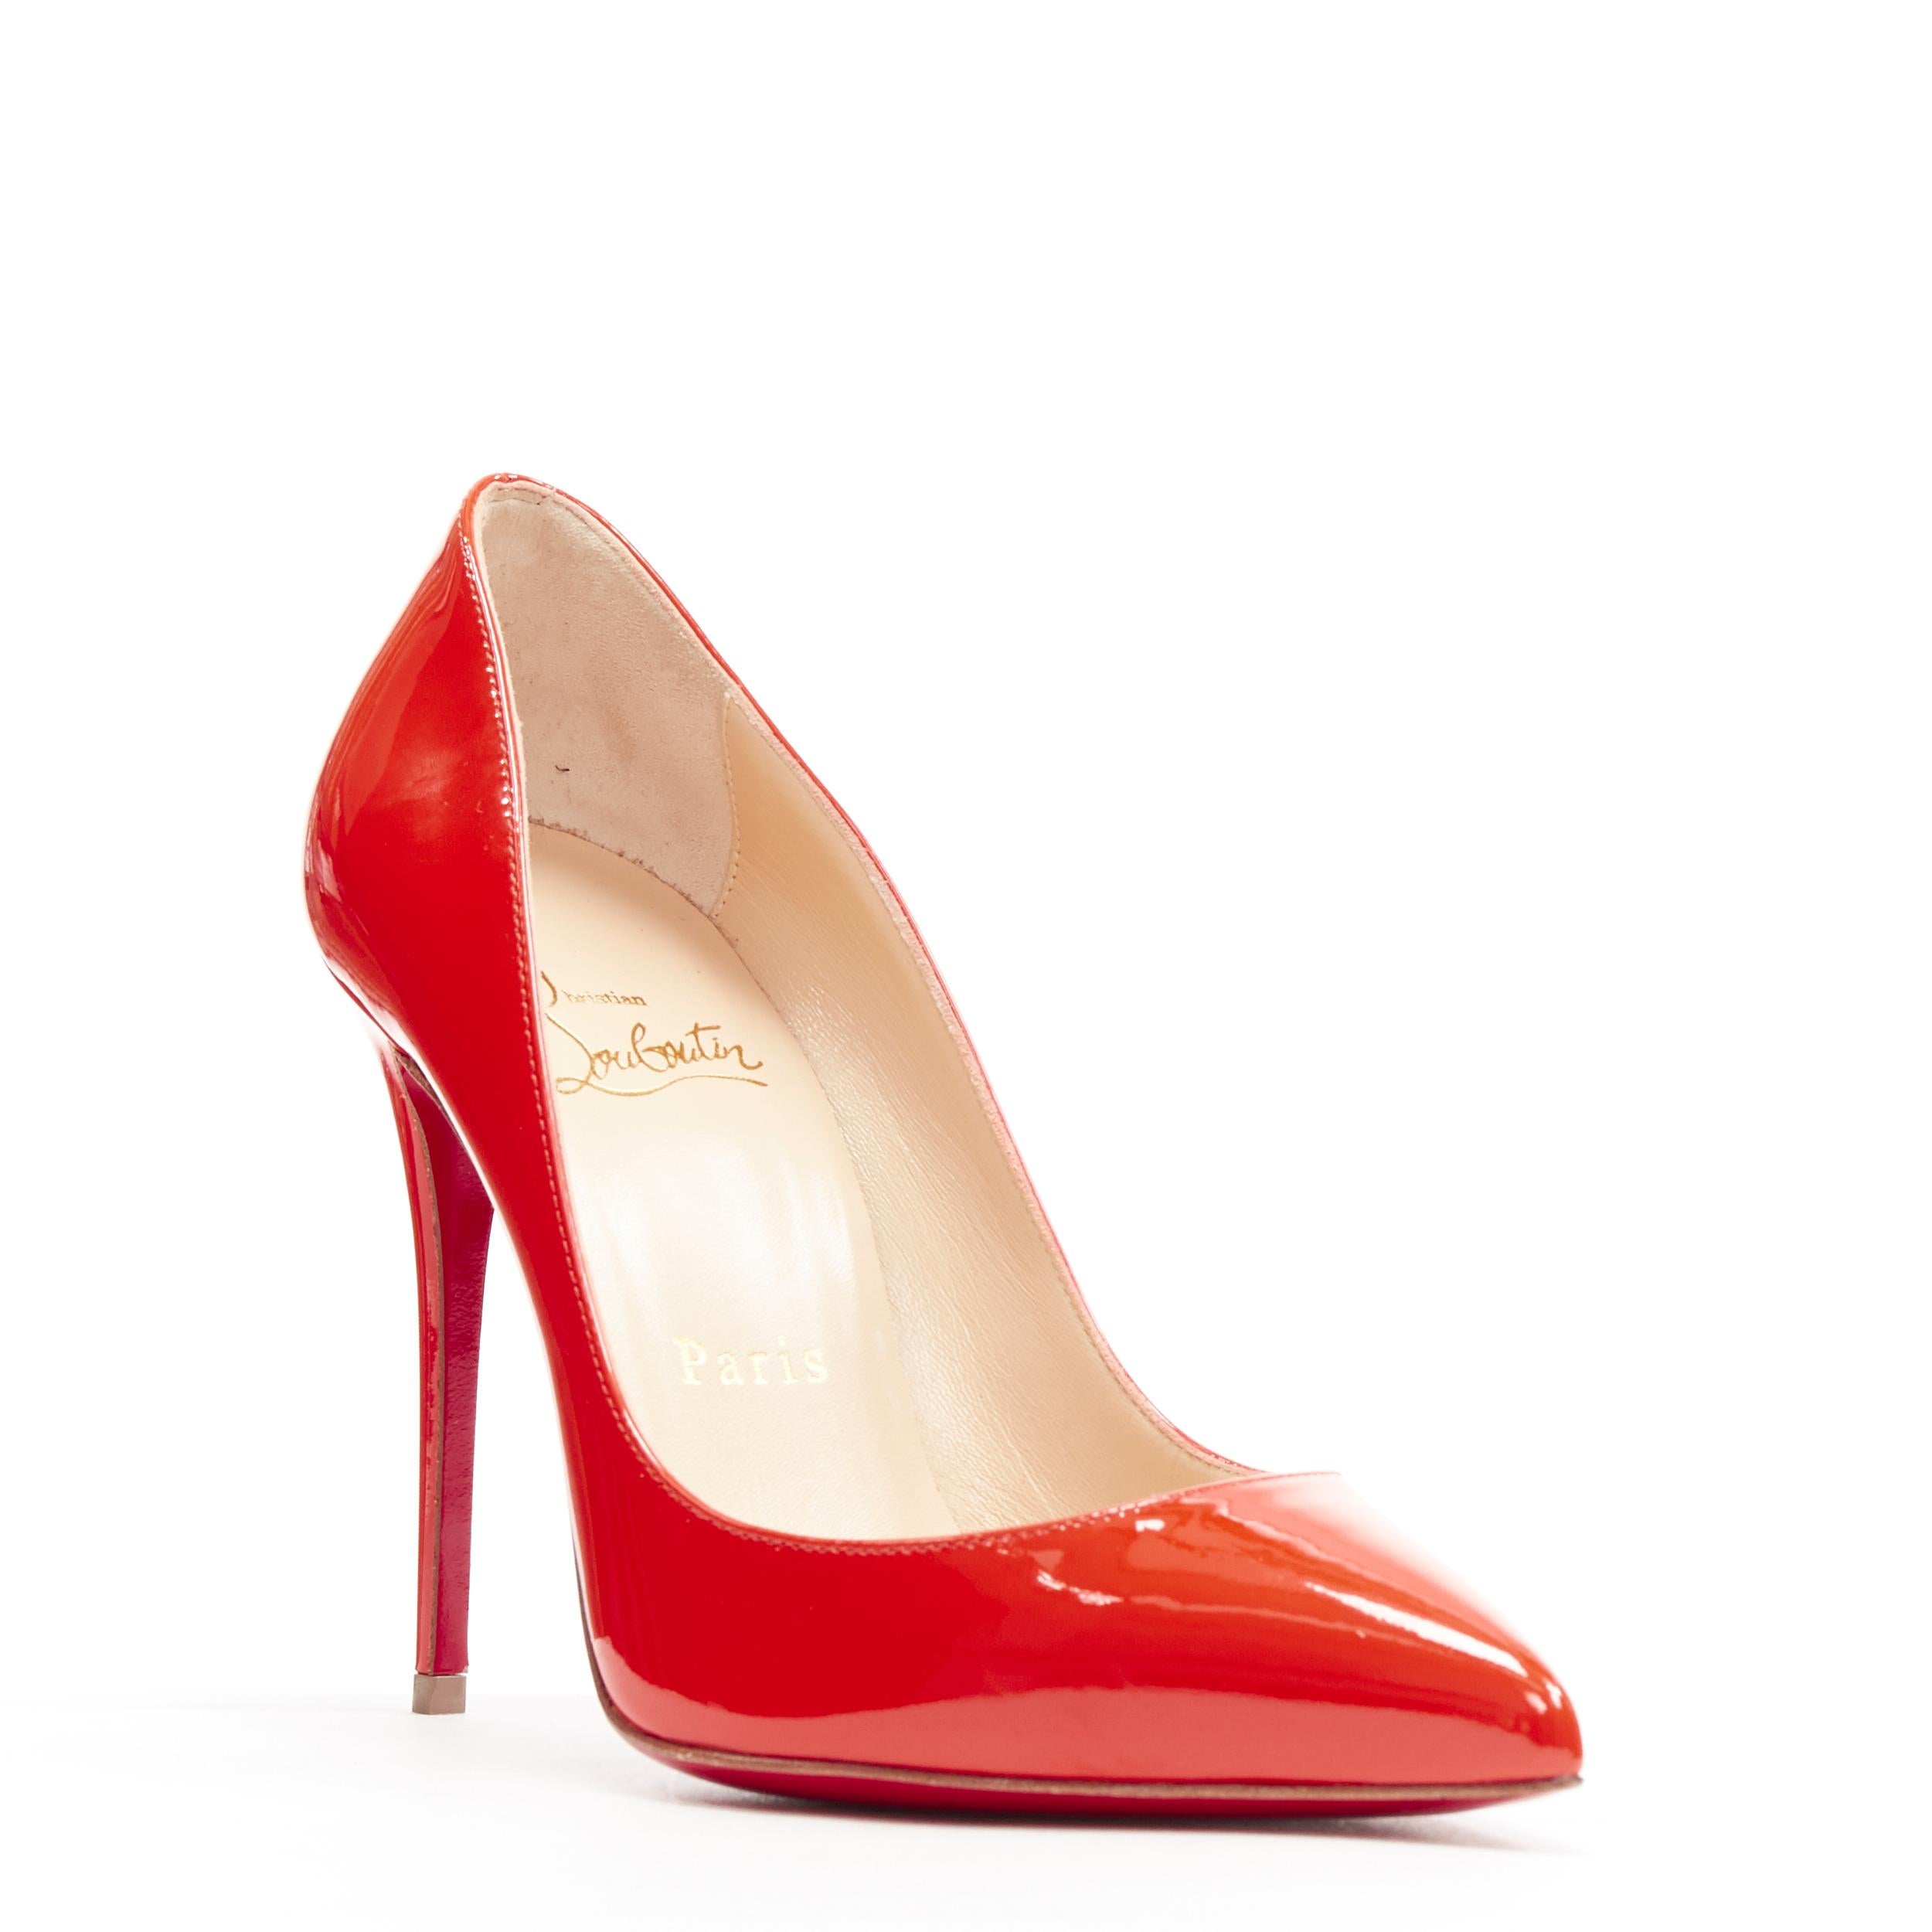 new CHRISTIAN LOUBOUTIN So Kate 100 coral red patent point toe pigalle pump EU36
Brand: Christian Louboutin
Designer: Christian Louboutin
Model Name / Style: So Kate 100
Material: Patent leather
Color: Red
Pattern: Solid
Closure: Slip on
Extra